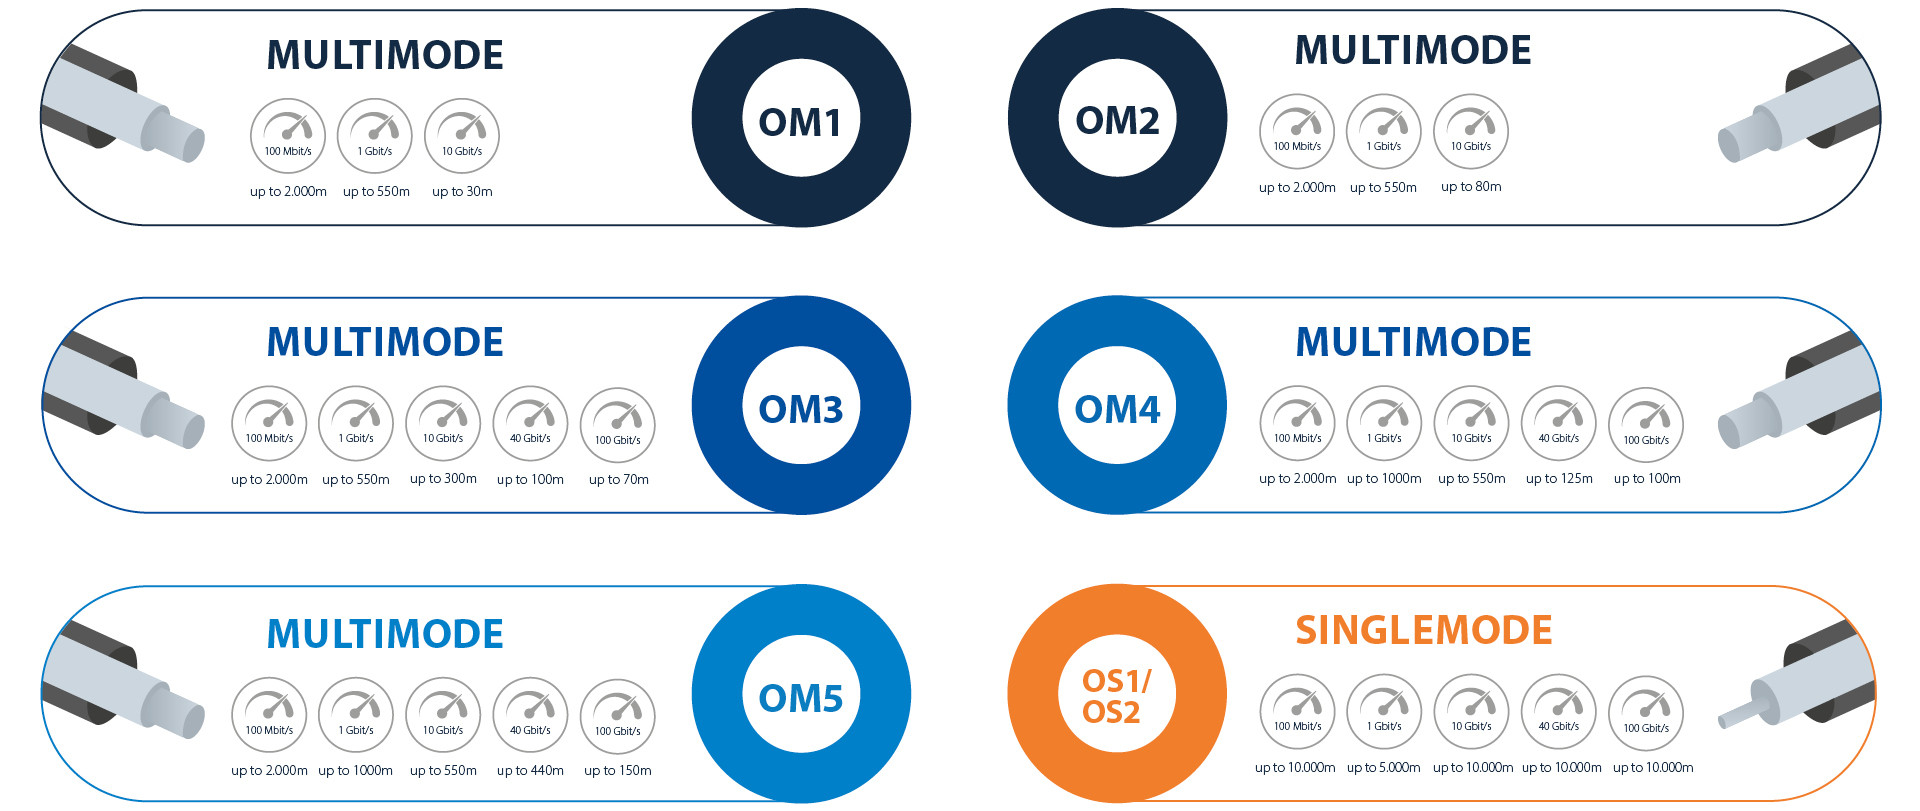 Comparison chart of the transmission rates and ranges of multimode (OM1 to OM5) and singlemode (OS1/OS2) fiber optic cables.